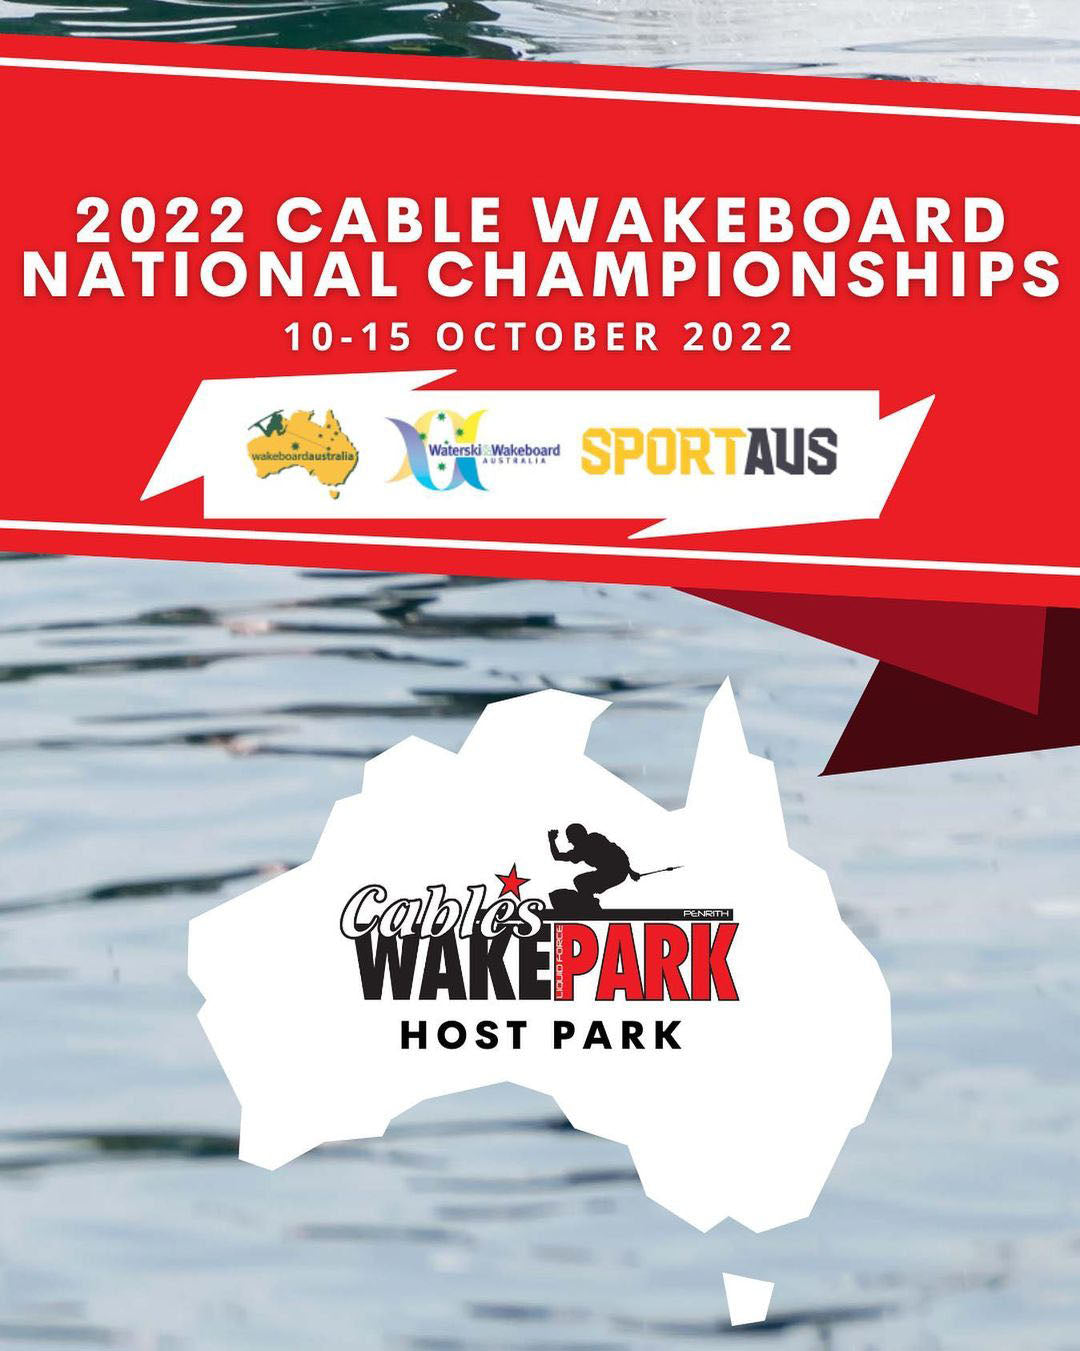 2022 Cable Wakeboard National Championships